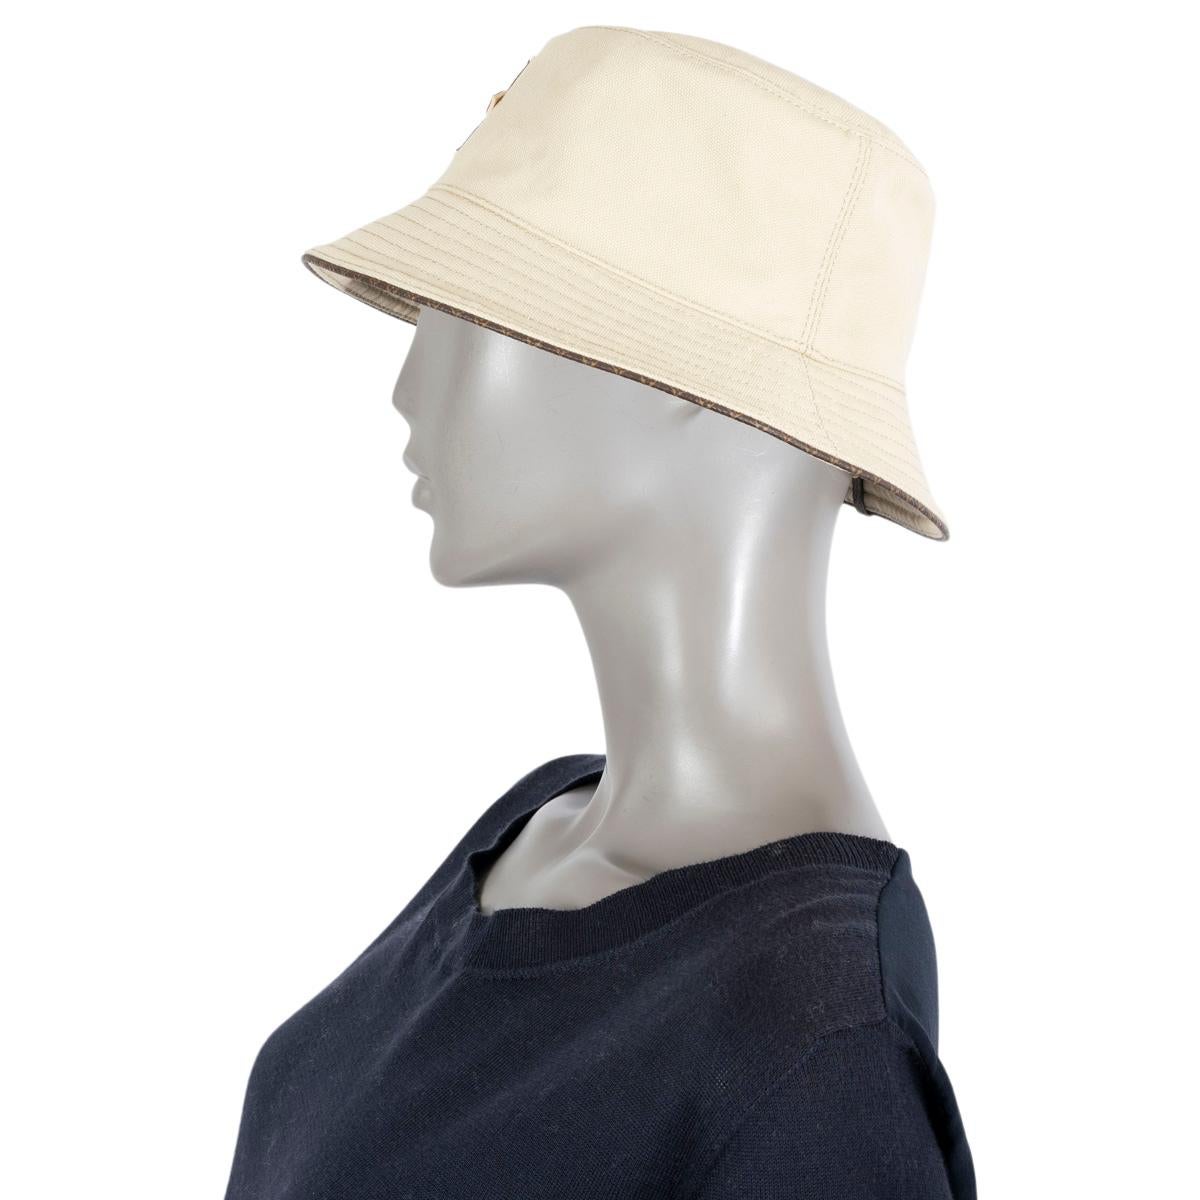 louis vuitton bucket hat price in south africa